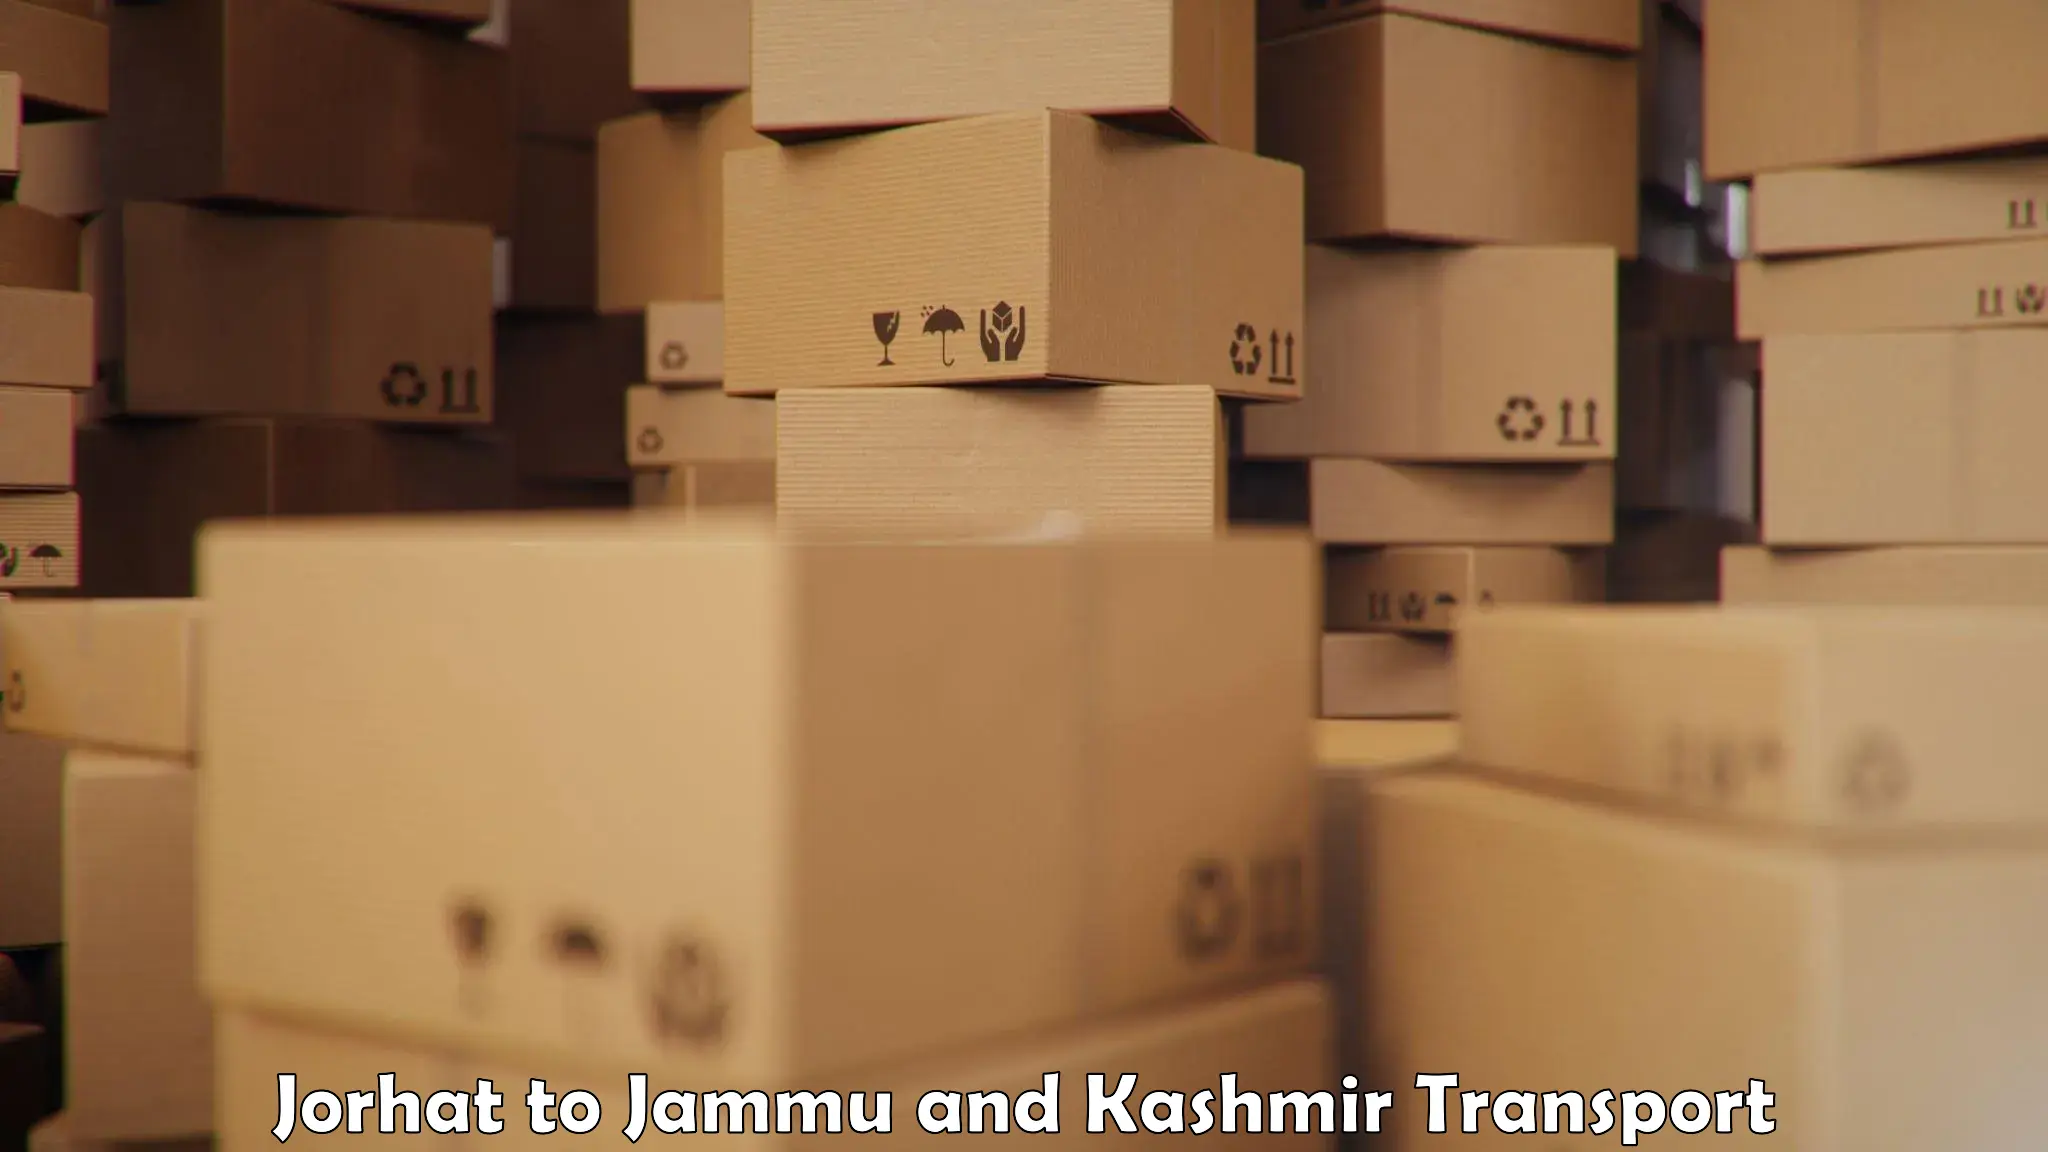 Shipping services Jorhat to Budgam